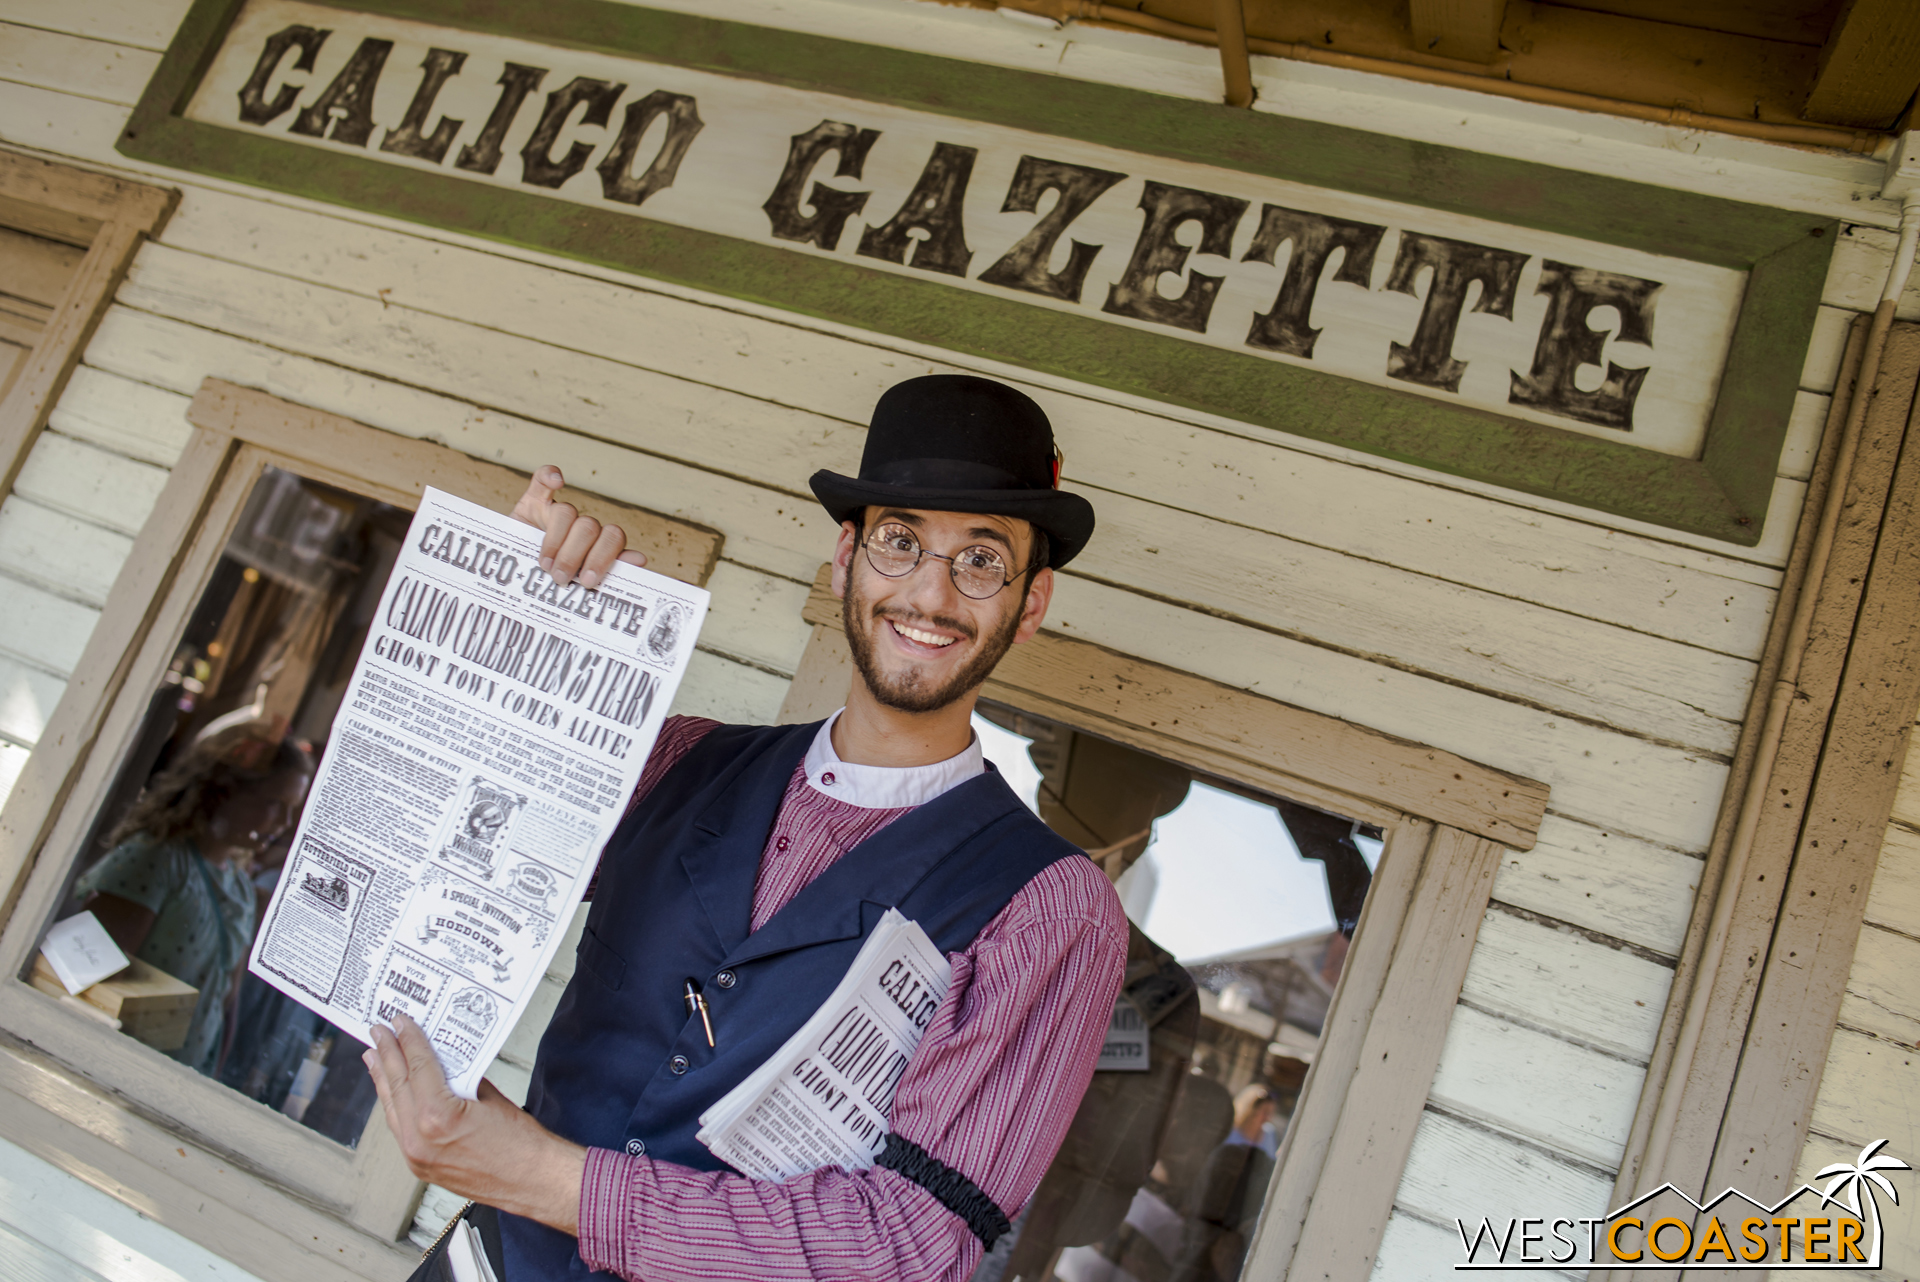  The  Calico Gazette  editor poses with the latest edition of the paper.   